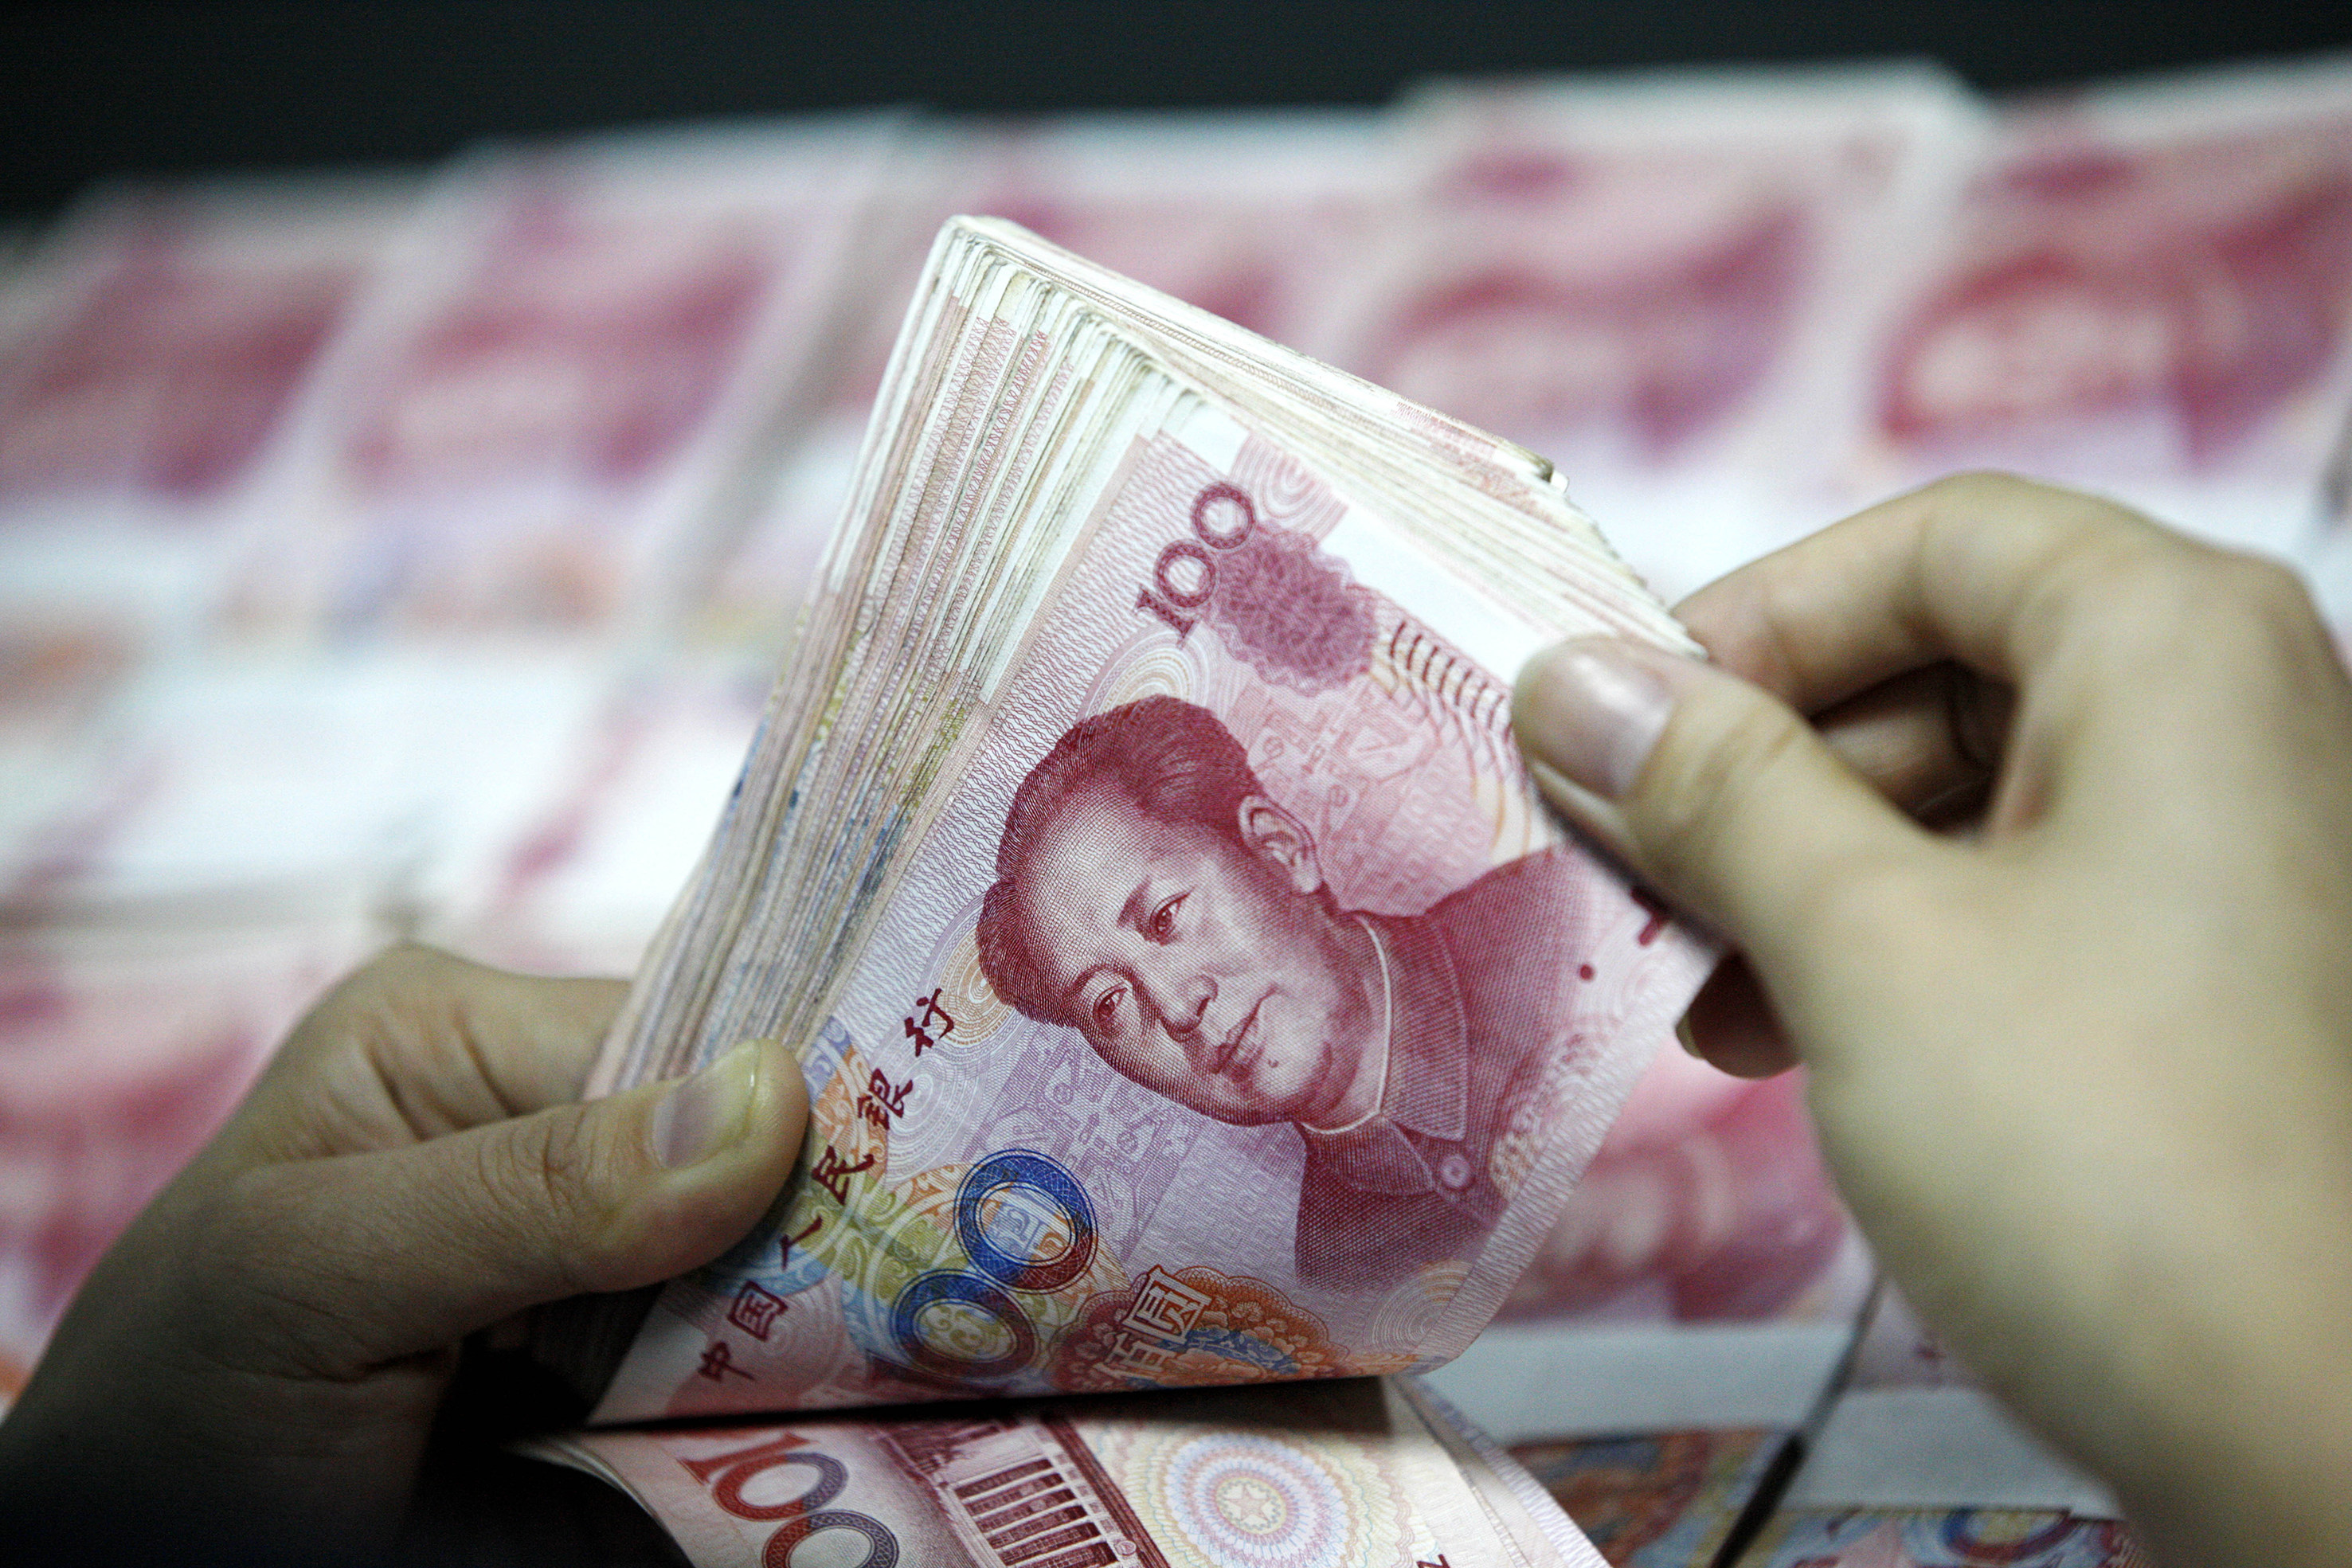 New draft rules could put auditors under greater scrutiny in China. Photo: Shutterstock